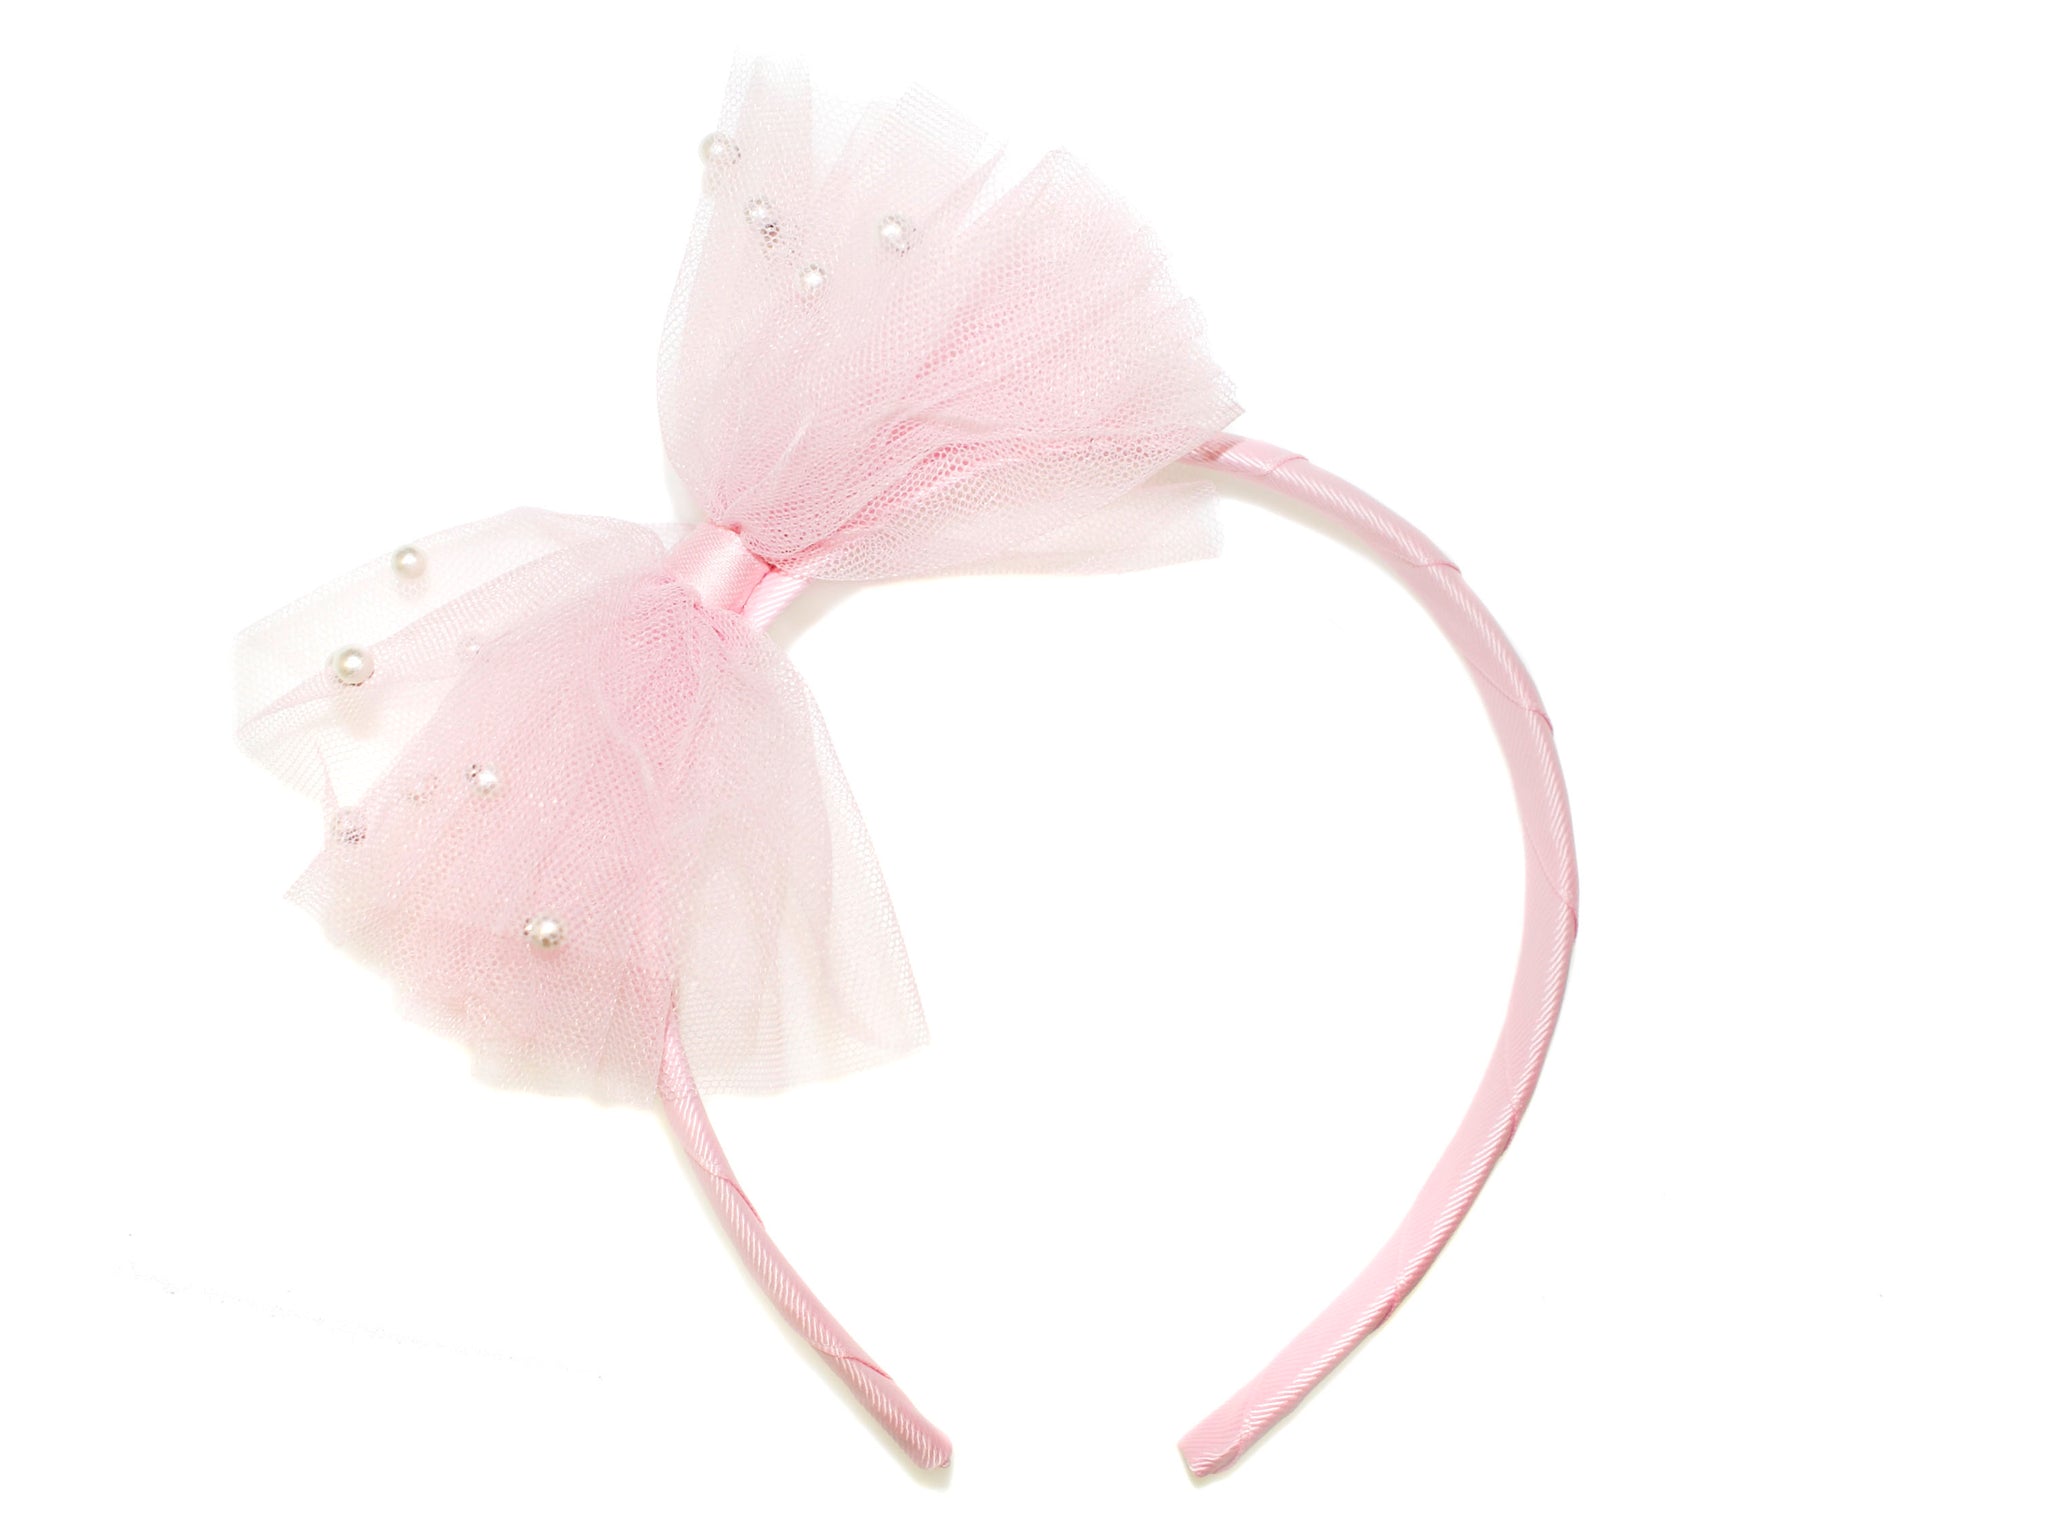 Pearl Tulle Bow Alice Band - Light Pink